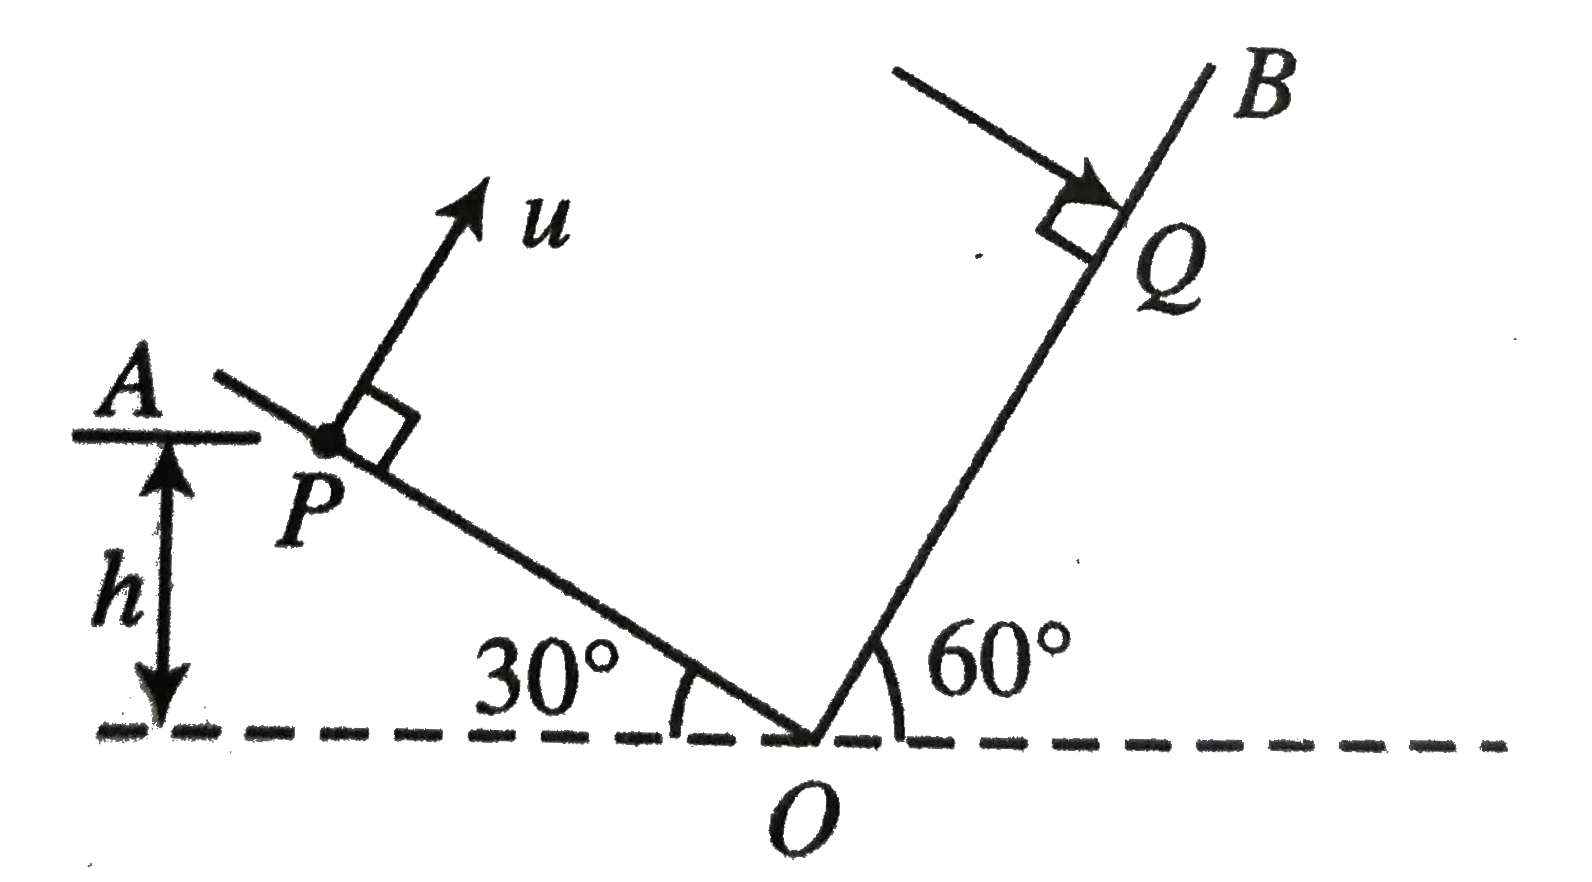 Two inclined planes OA and OB having inclination (with horizontal) 30^(@) and 60^@(), respectively, intersect each other at O as shown in figure. A particle is projected from point P with velocity u = 10sqrt3 ms^(-1) along a direction perpendicular to plane OA. If the particle strikes plane OB perpendicularly at Q, calculate      The maximum height attained by the particle (from the line O)